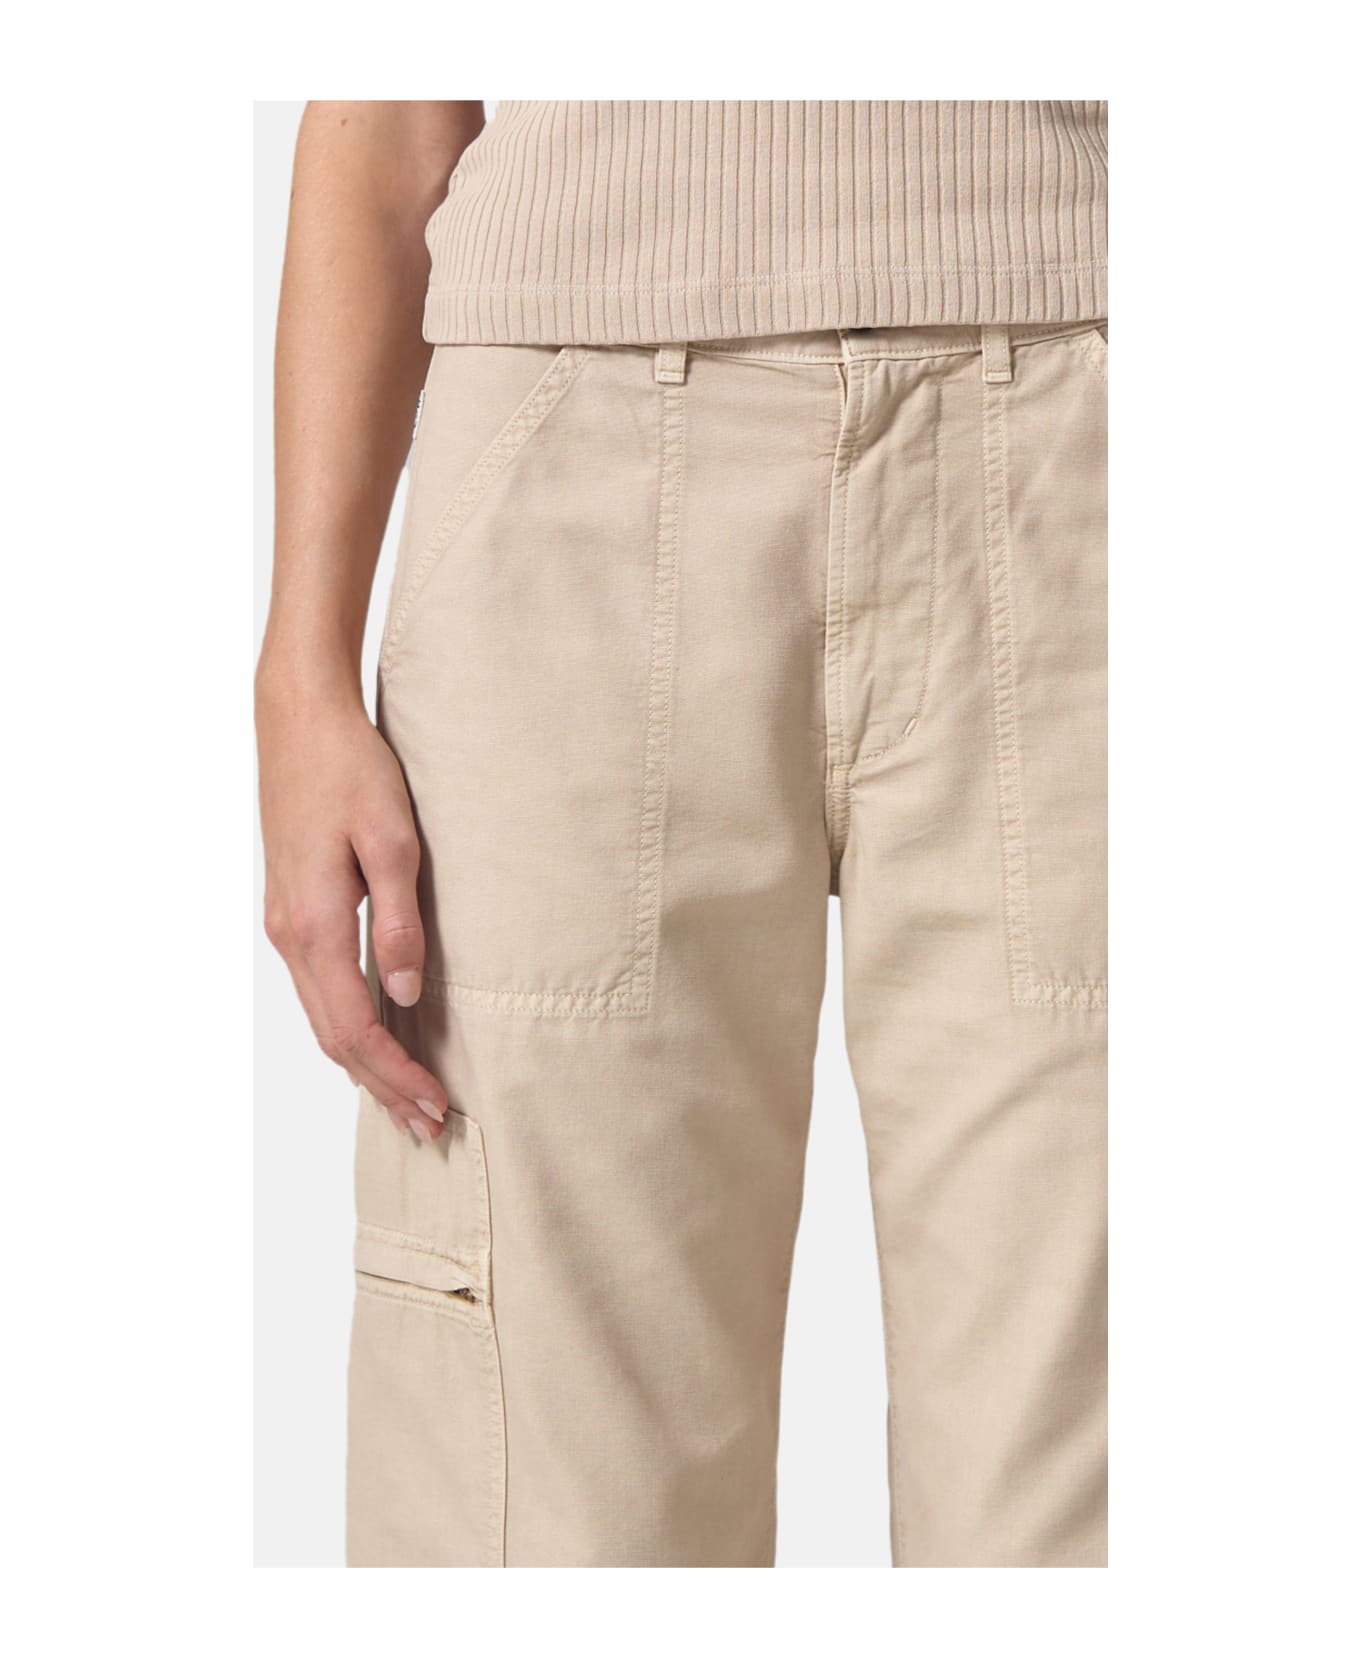 Citizens of Humanity Marcelle Cargo Pants - Beige ボトムス